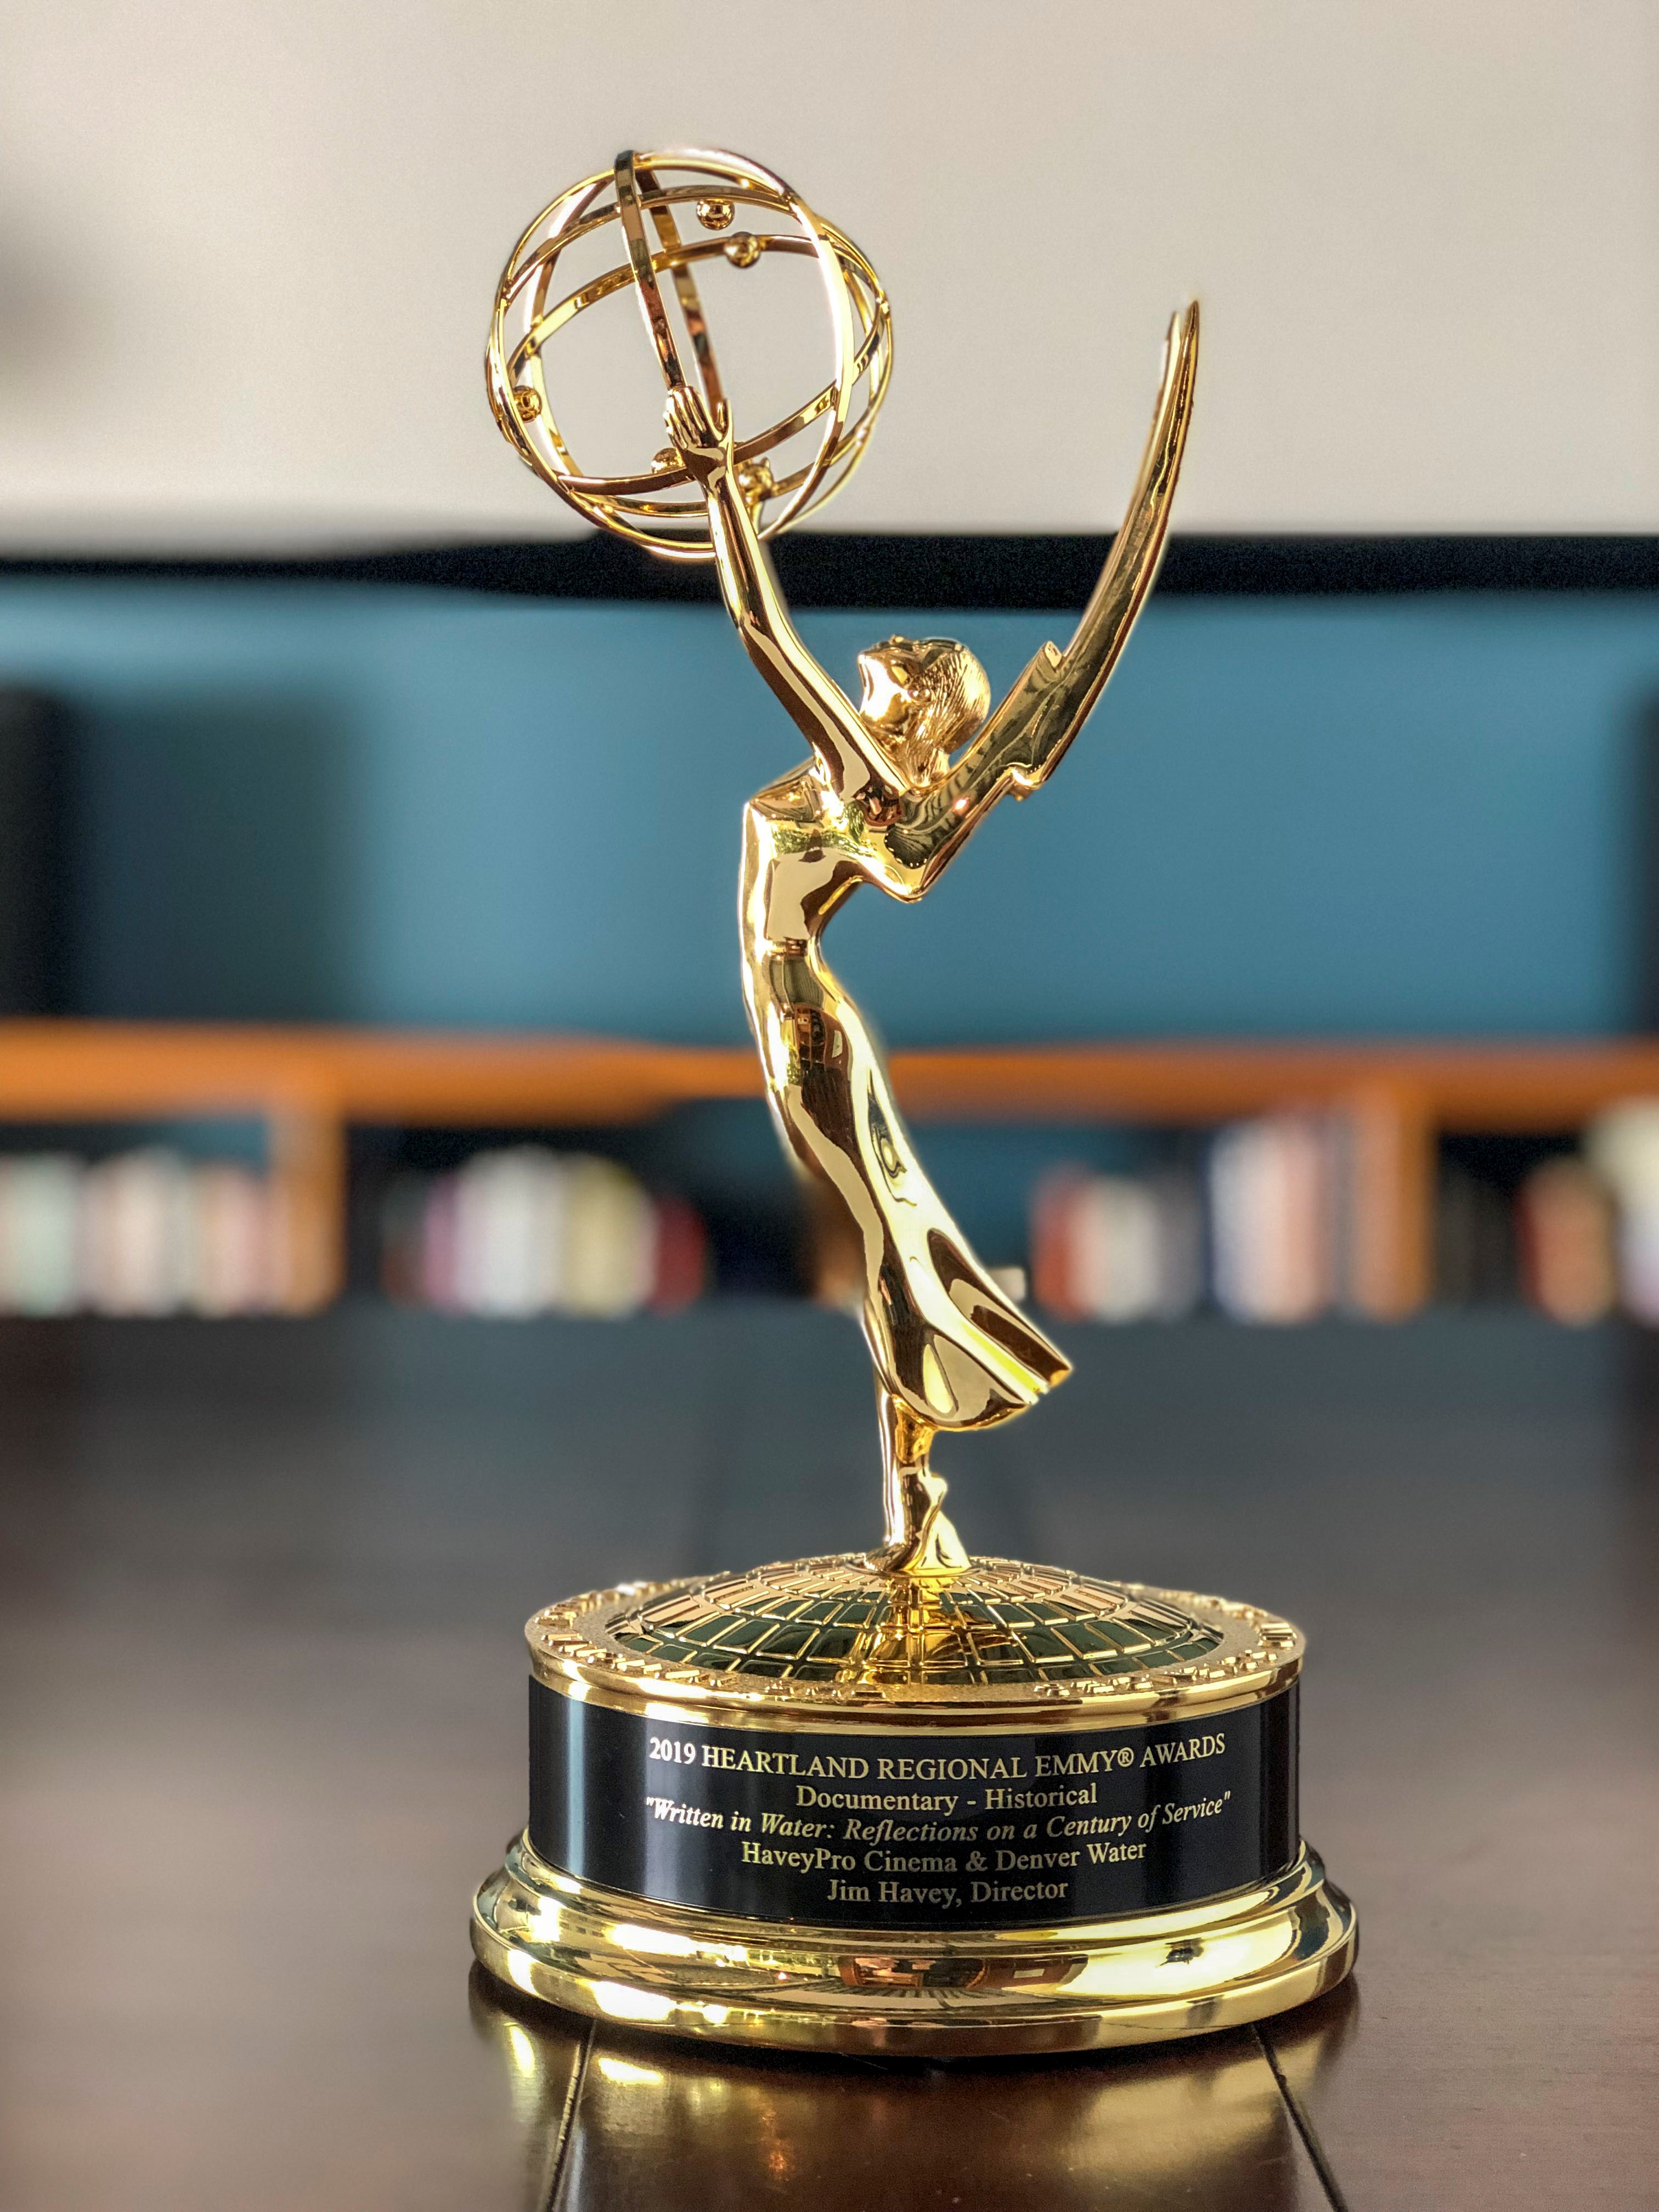 A gold statuette of a woman with wings holding an atom, the symbol of the Emmy award.